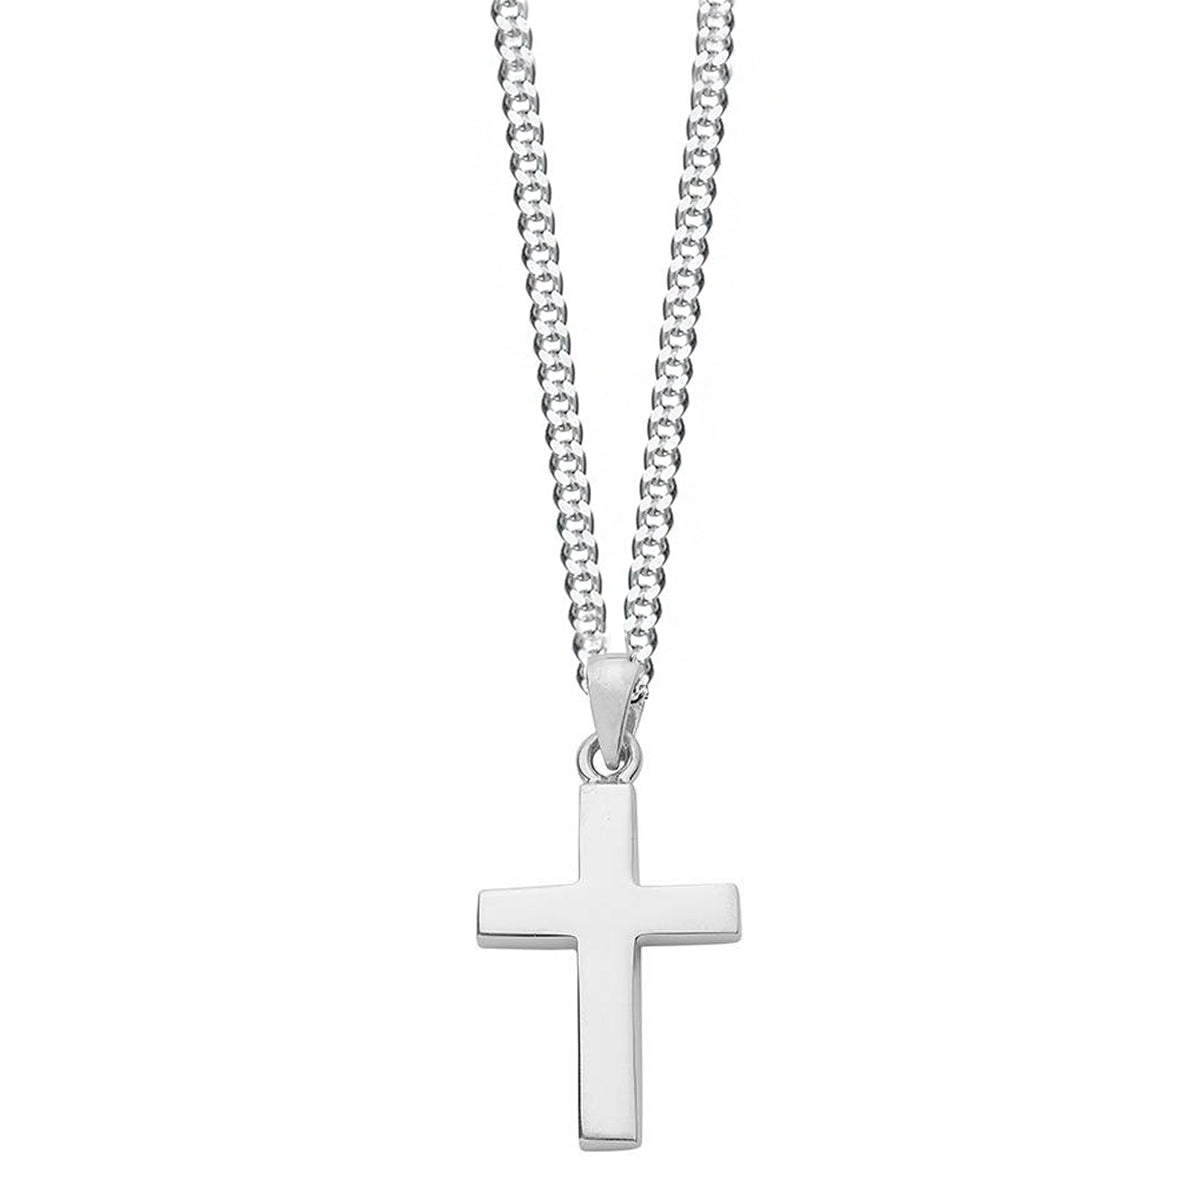 Silver Cross Necklace Chunky | Hersey & Son Silversmiths